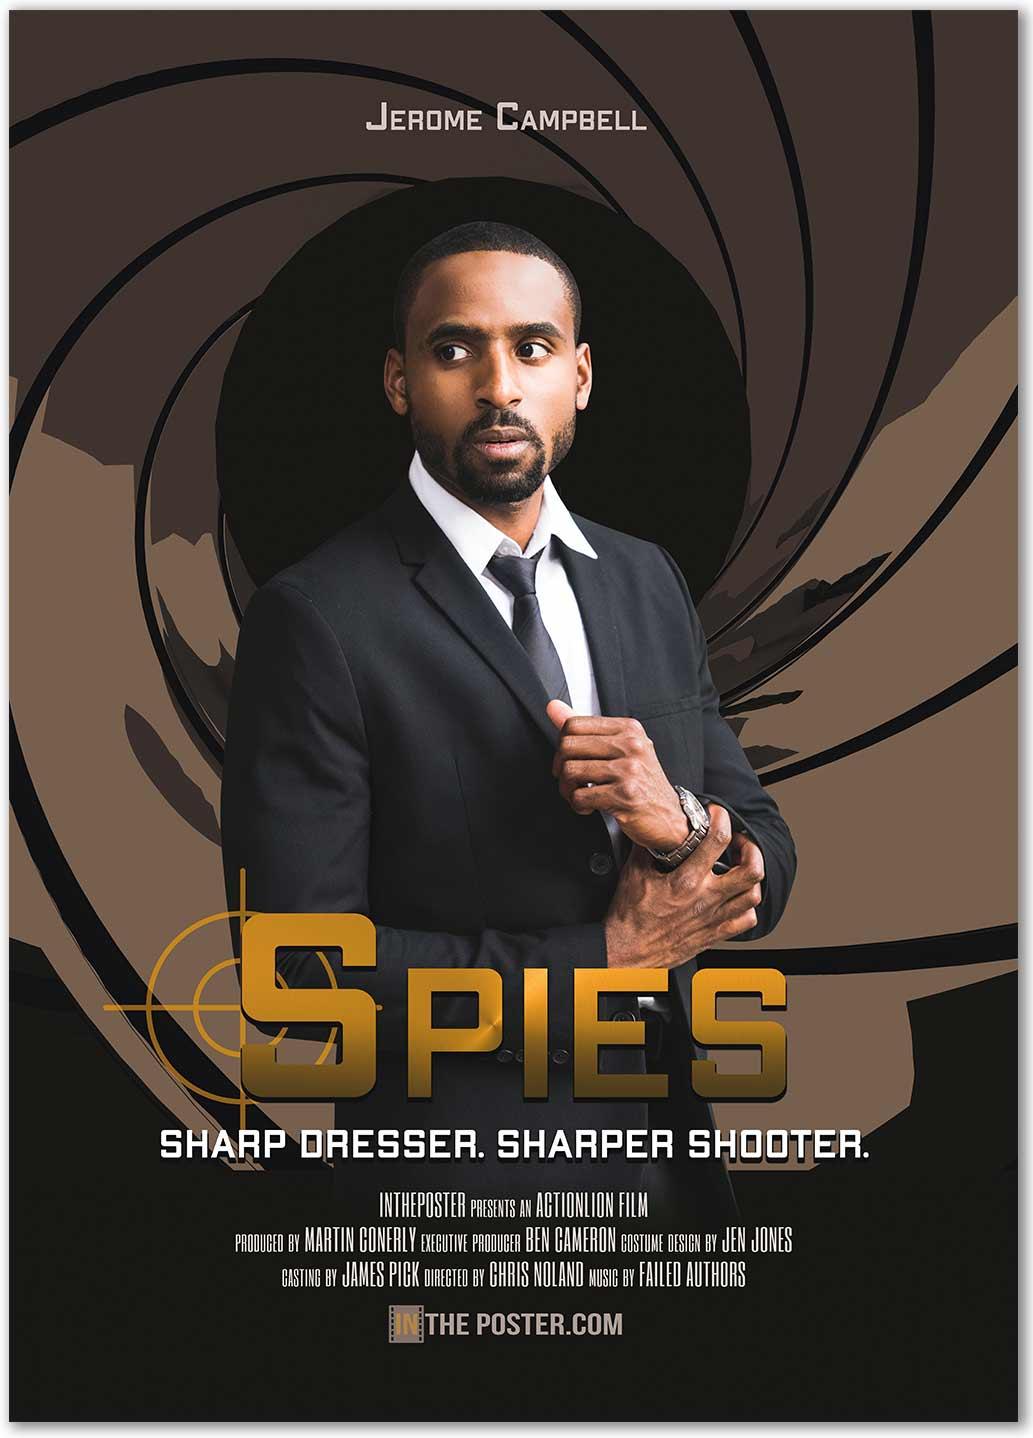 A movie poster with a spy checking his suit and looking cool, down the barrel of a gun